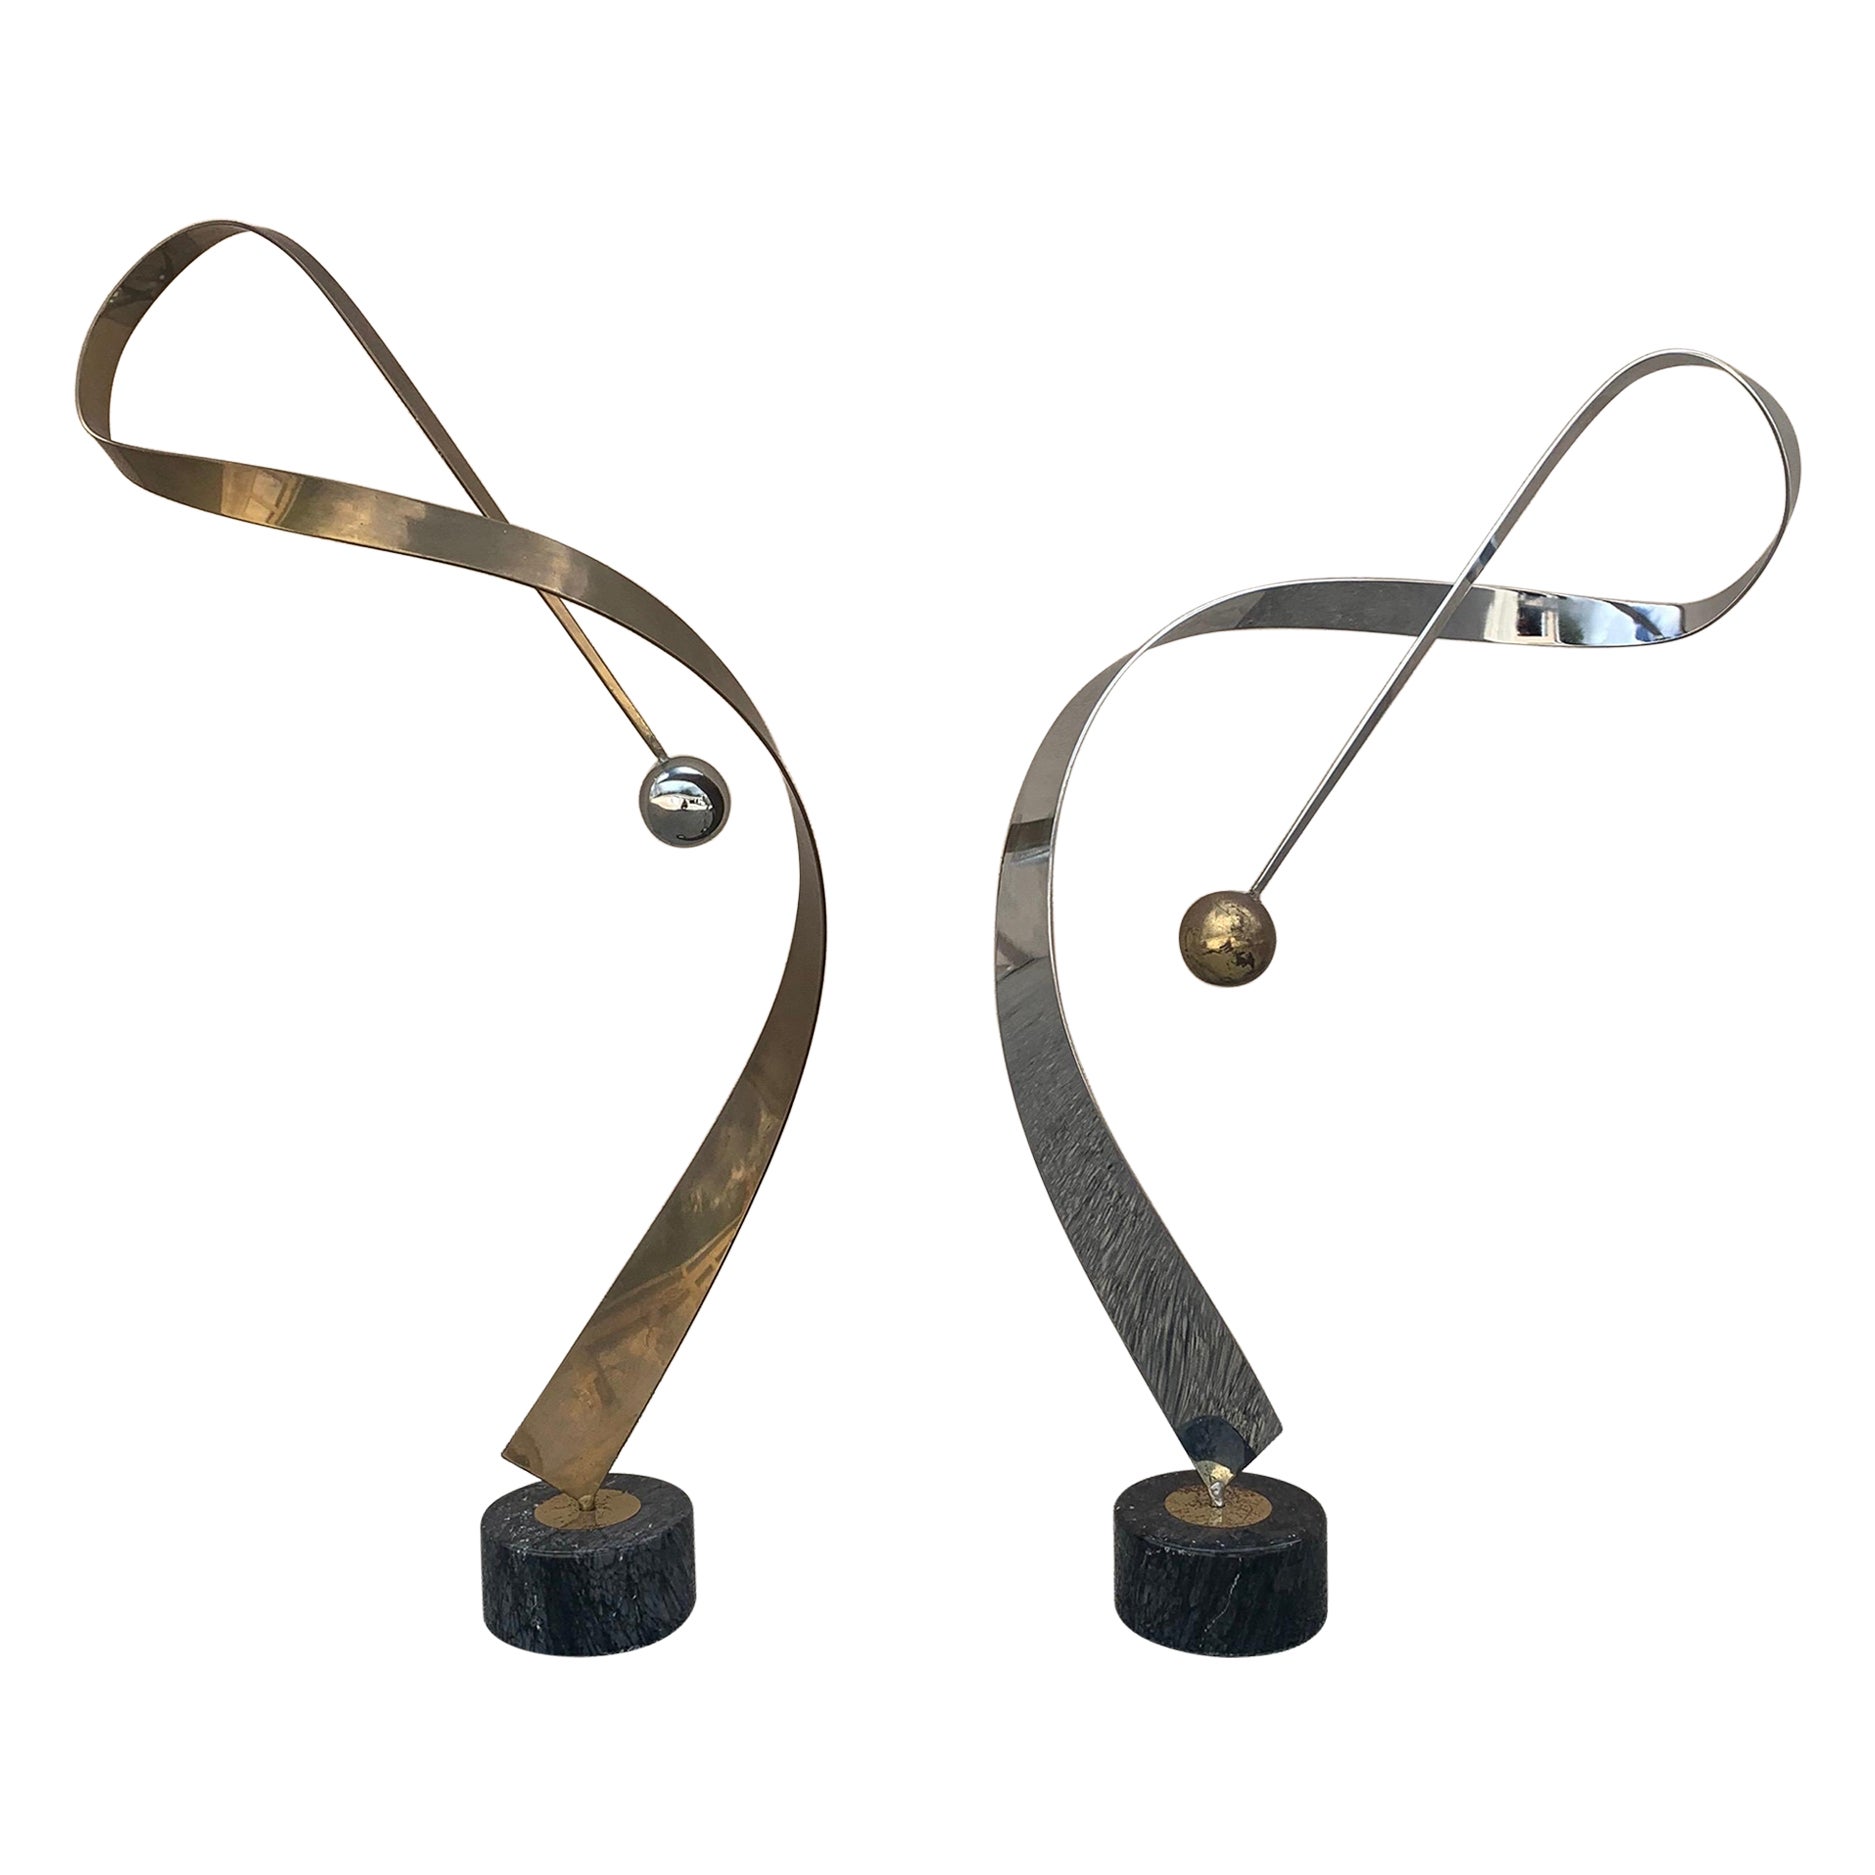 Mirrored Pair of C. Jere Ribbon Sculptures in Brass and Chrome